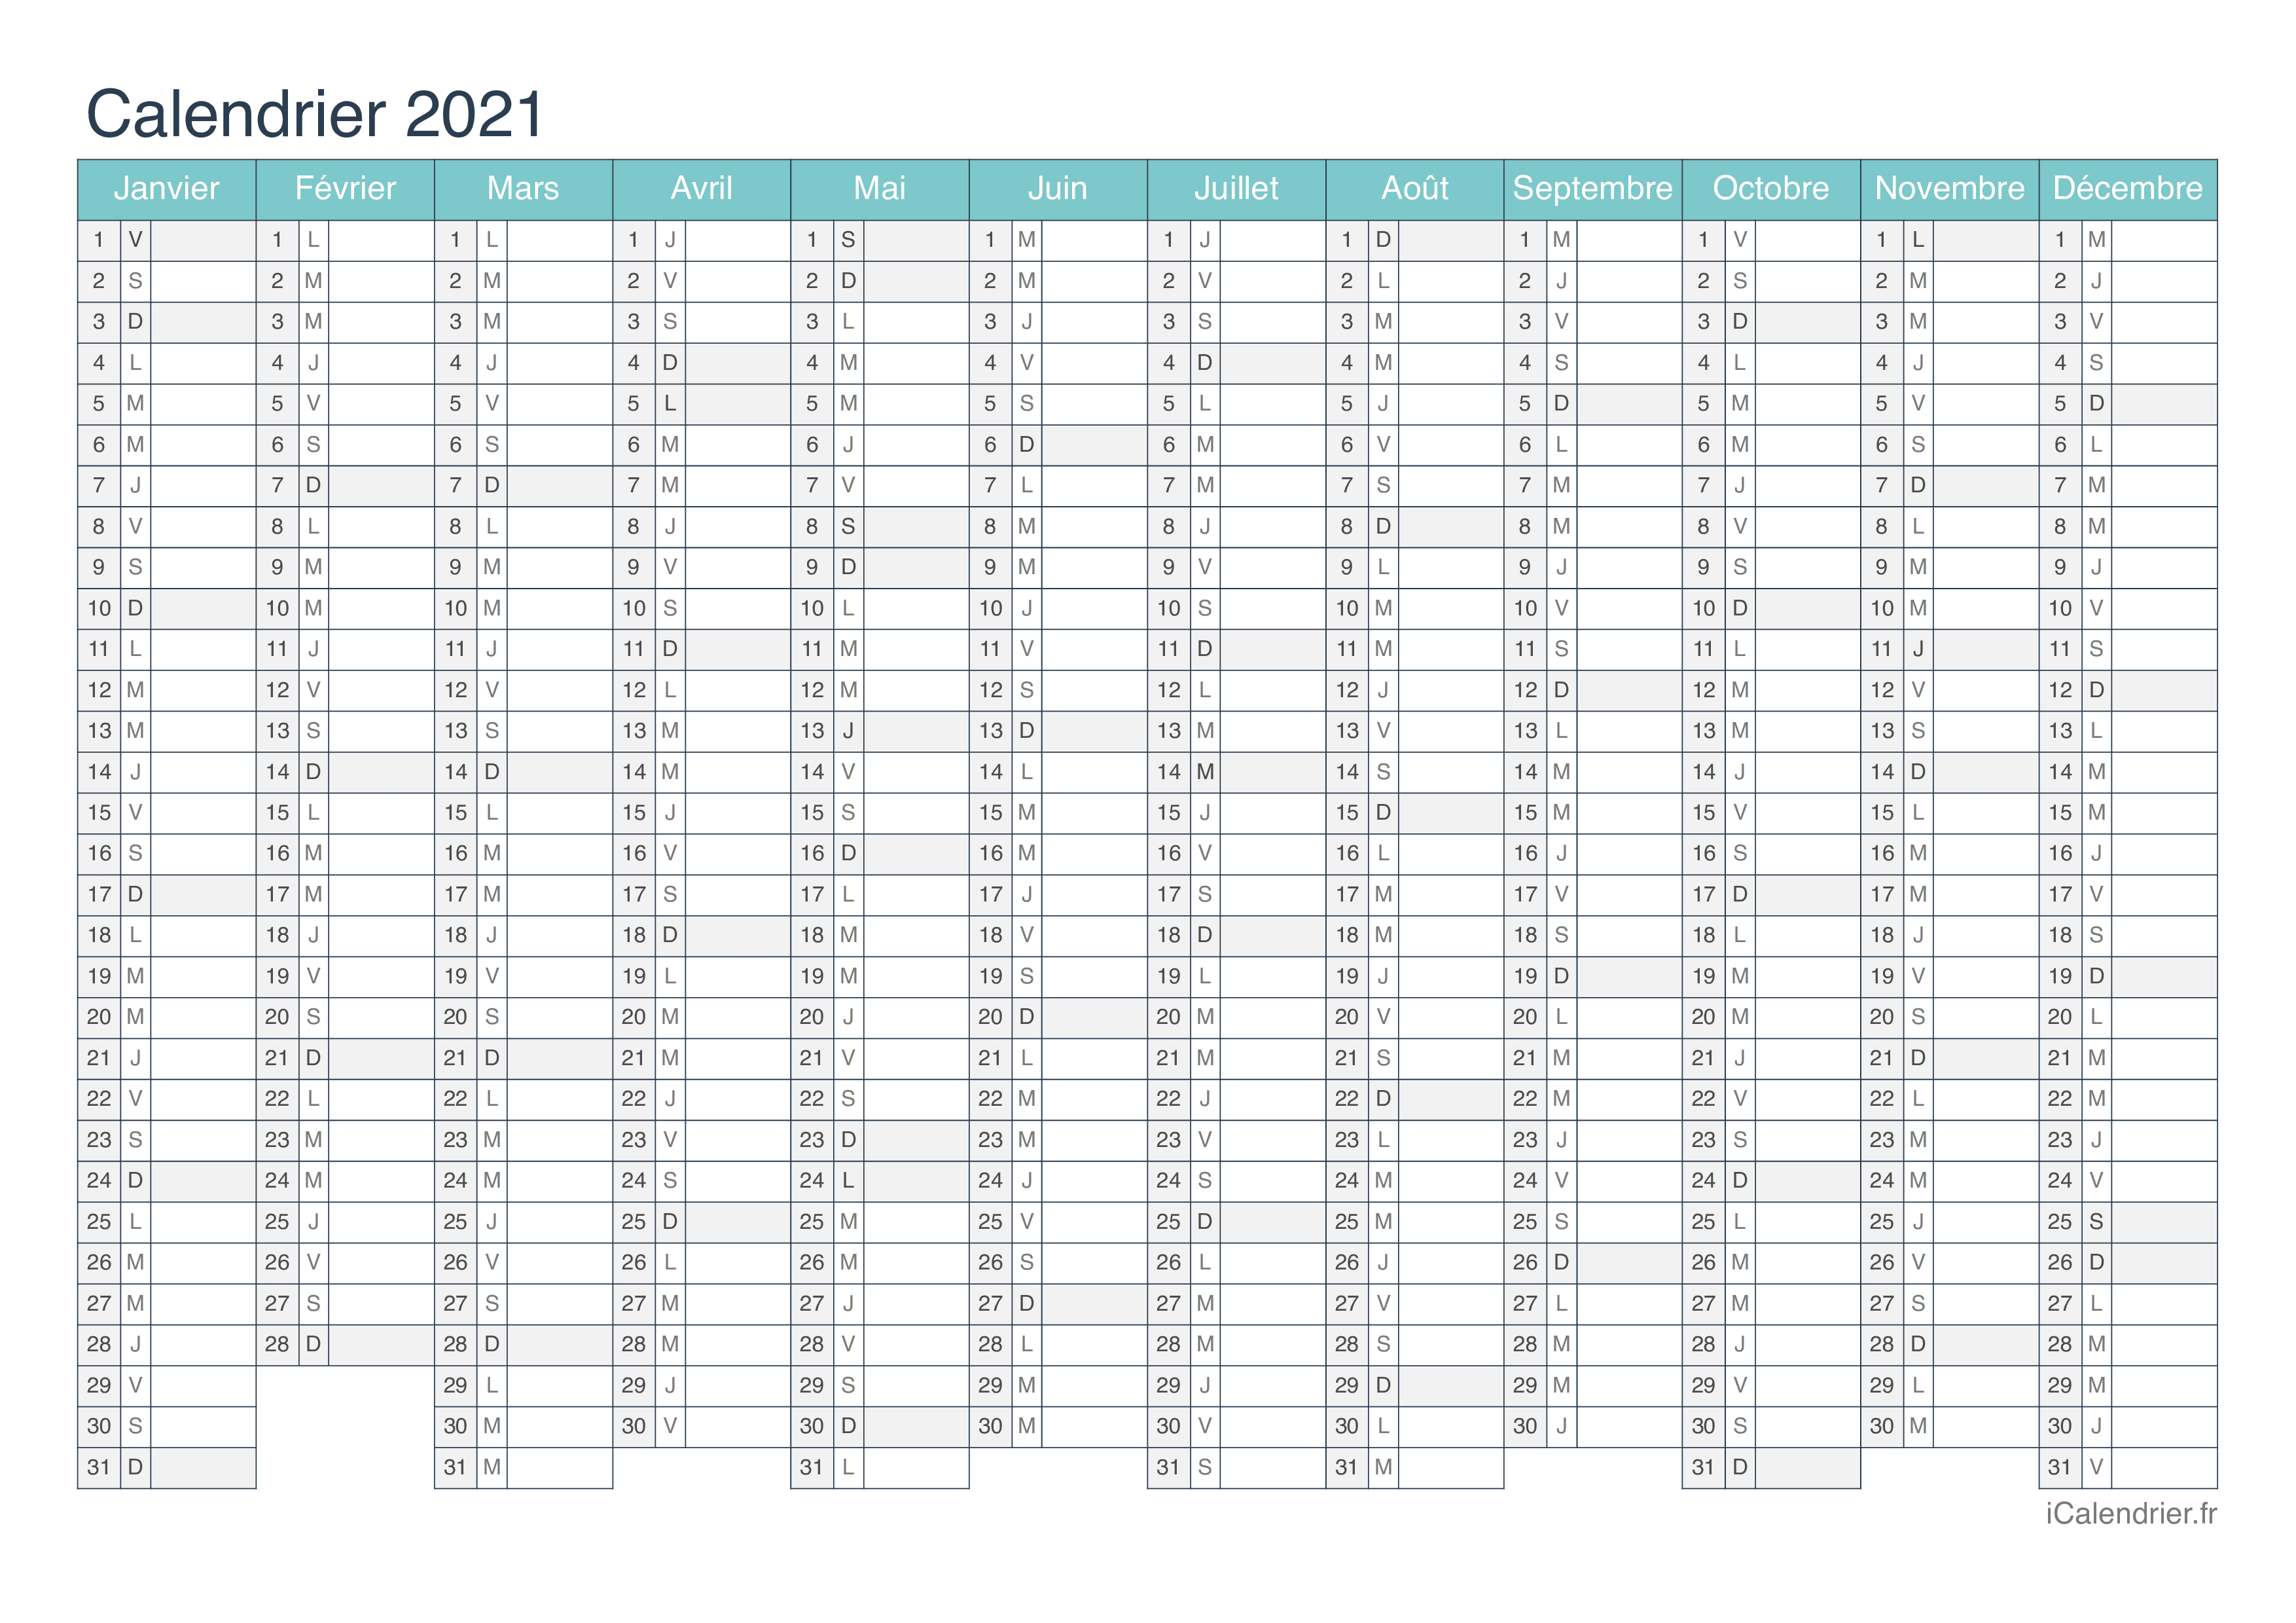 Calendrier 2021 - Turquoise